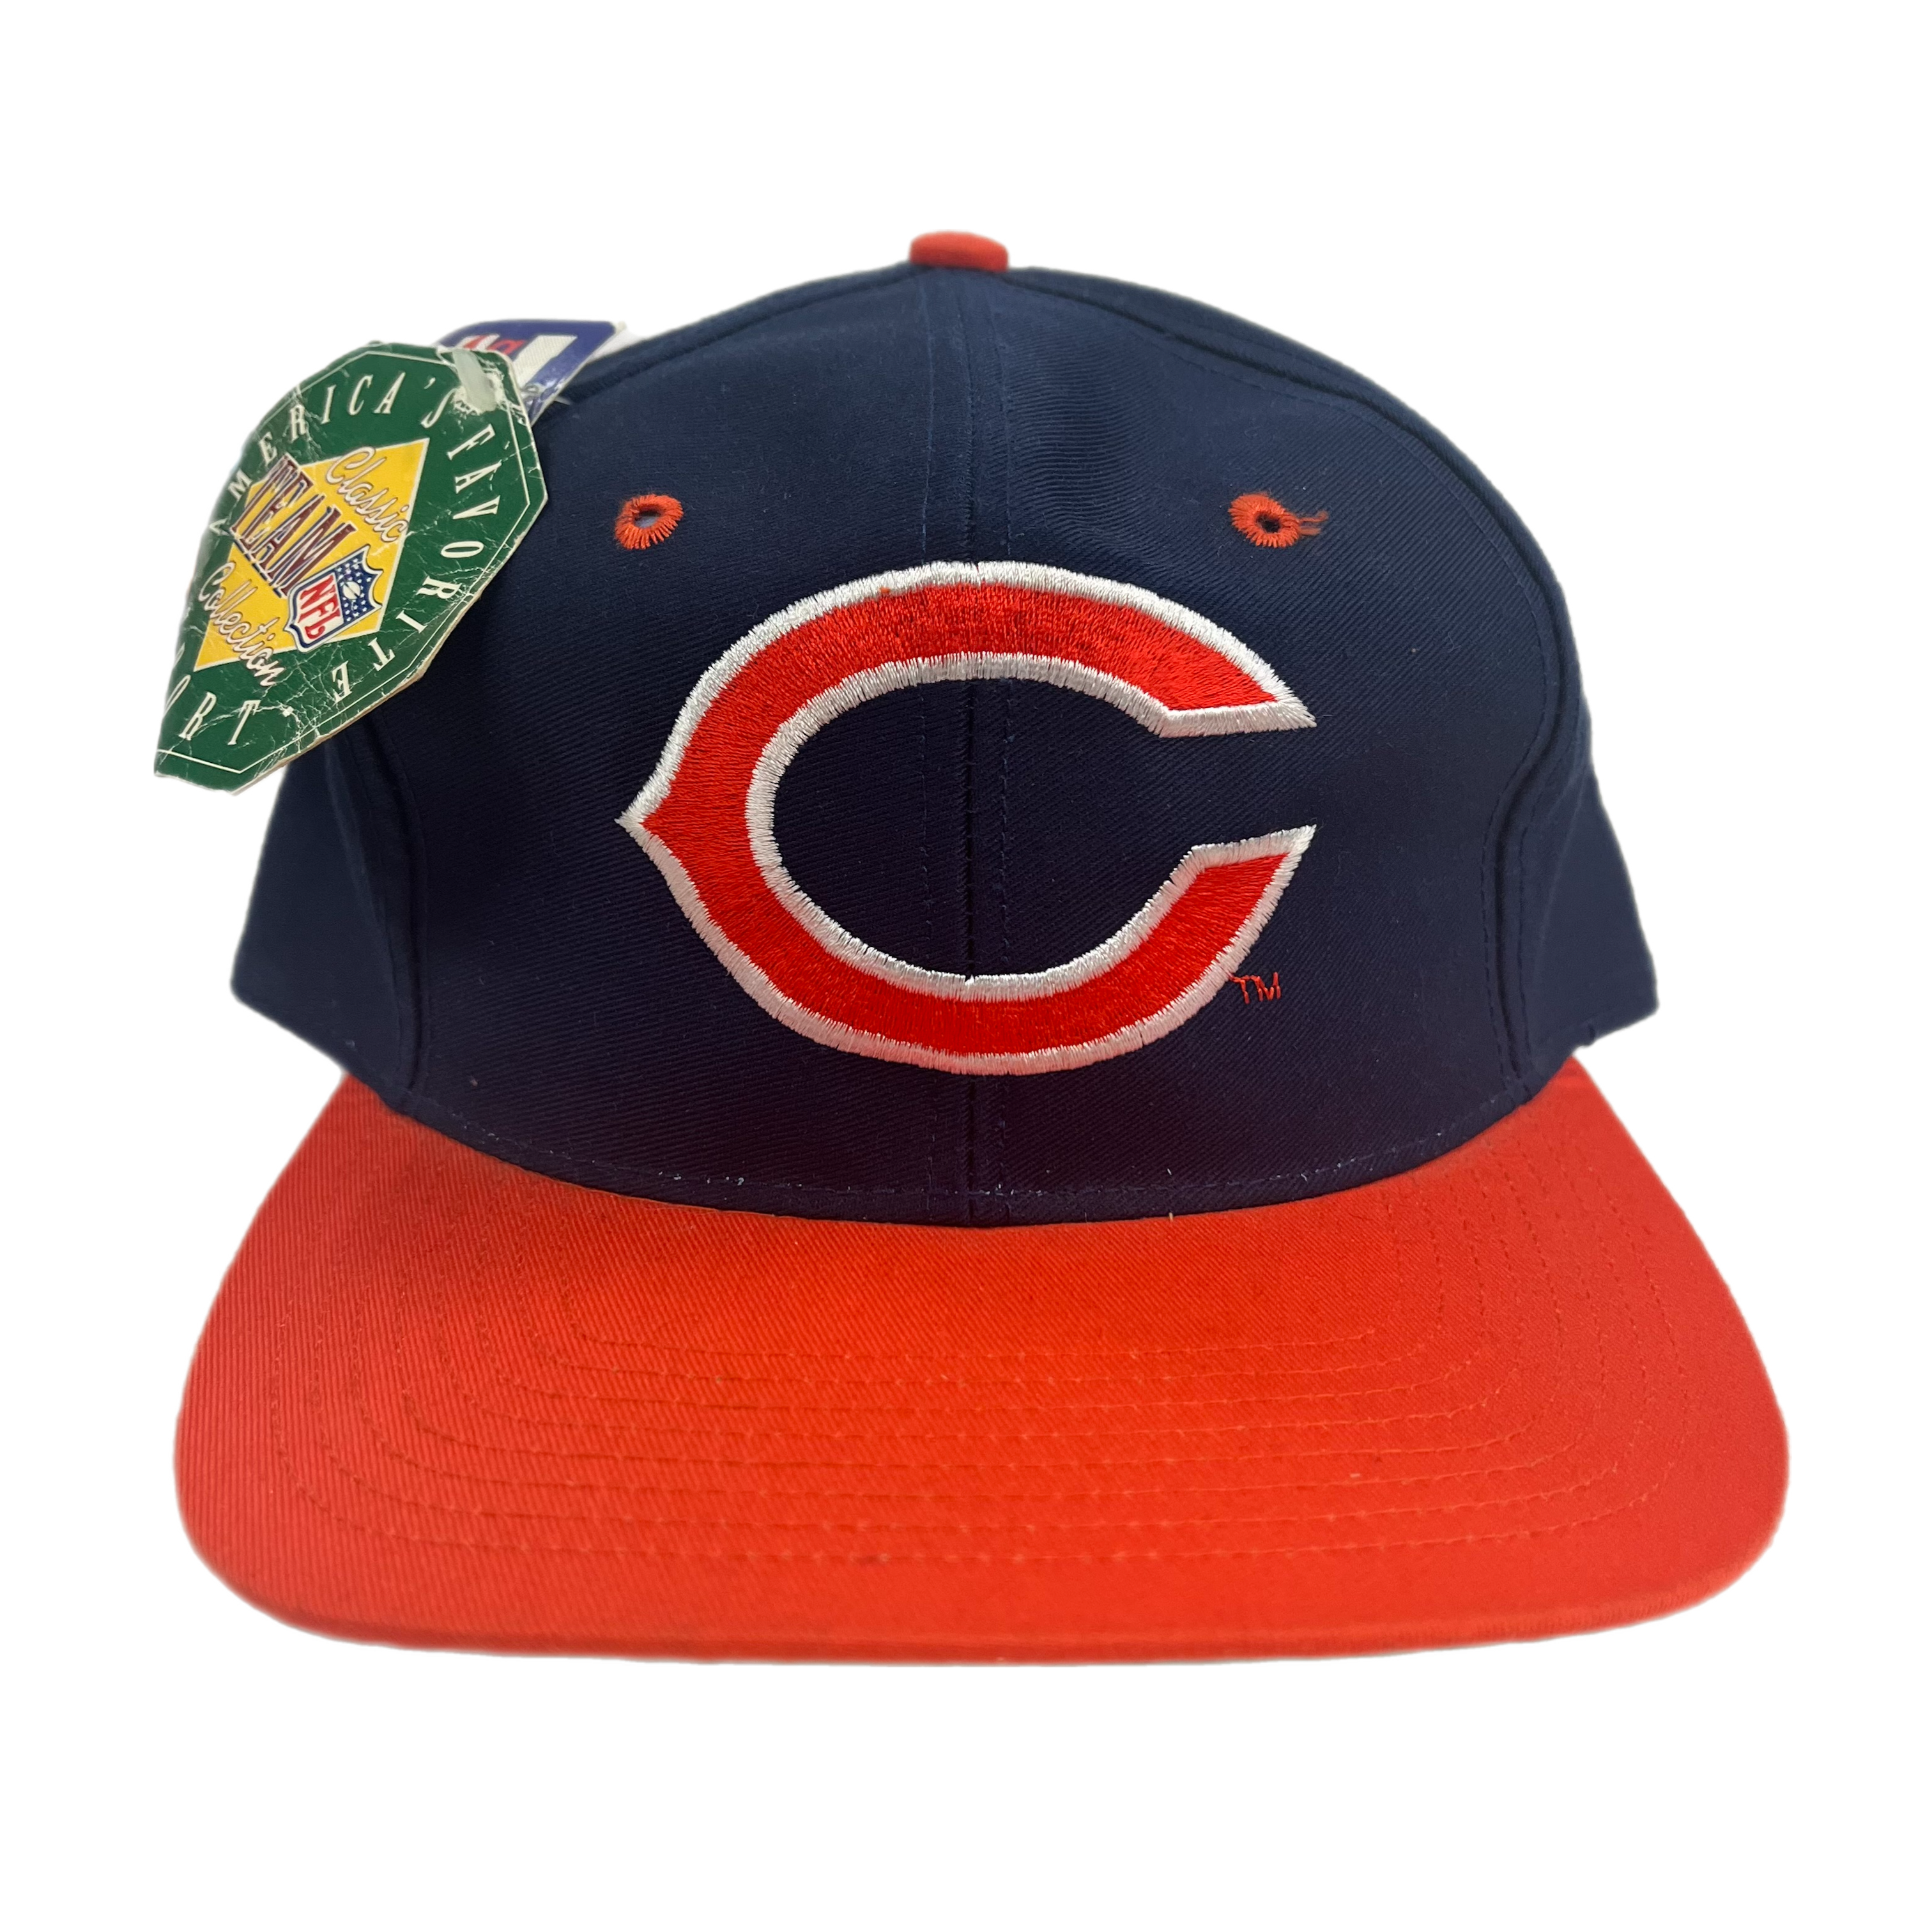 Vintage Chicago Bears 'NFL' Youth Fitted Hat